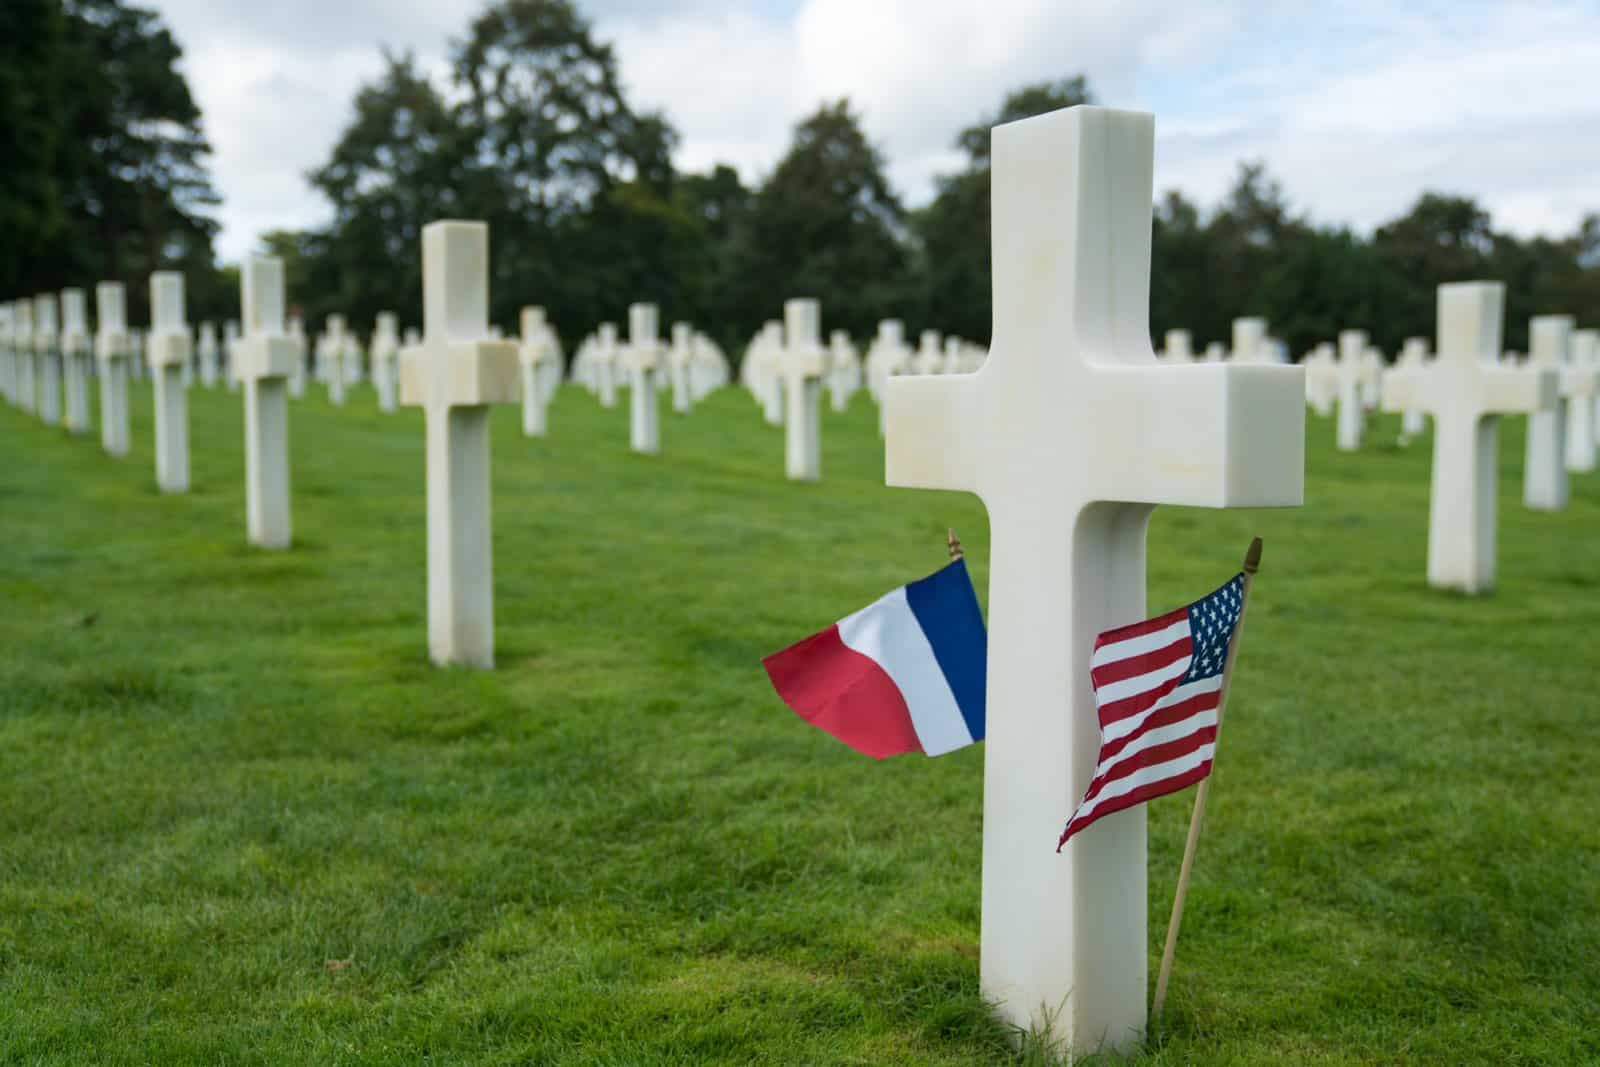 <p class="wp-caption-text">Image Credit: Shutterstock / makasana photo</p>  <p>While not on American soil, this cemetery honors the American troops who died in Europe during D-Day and subsequent operations—a poignant reminder of the global scale of WWII.</p>